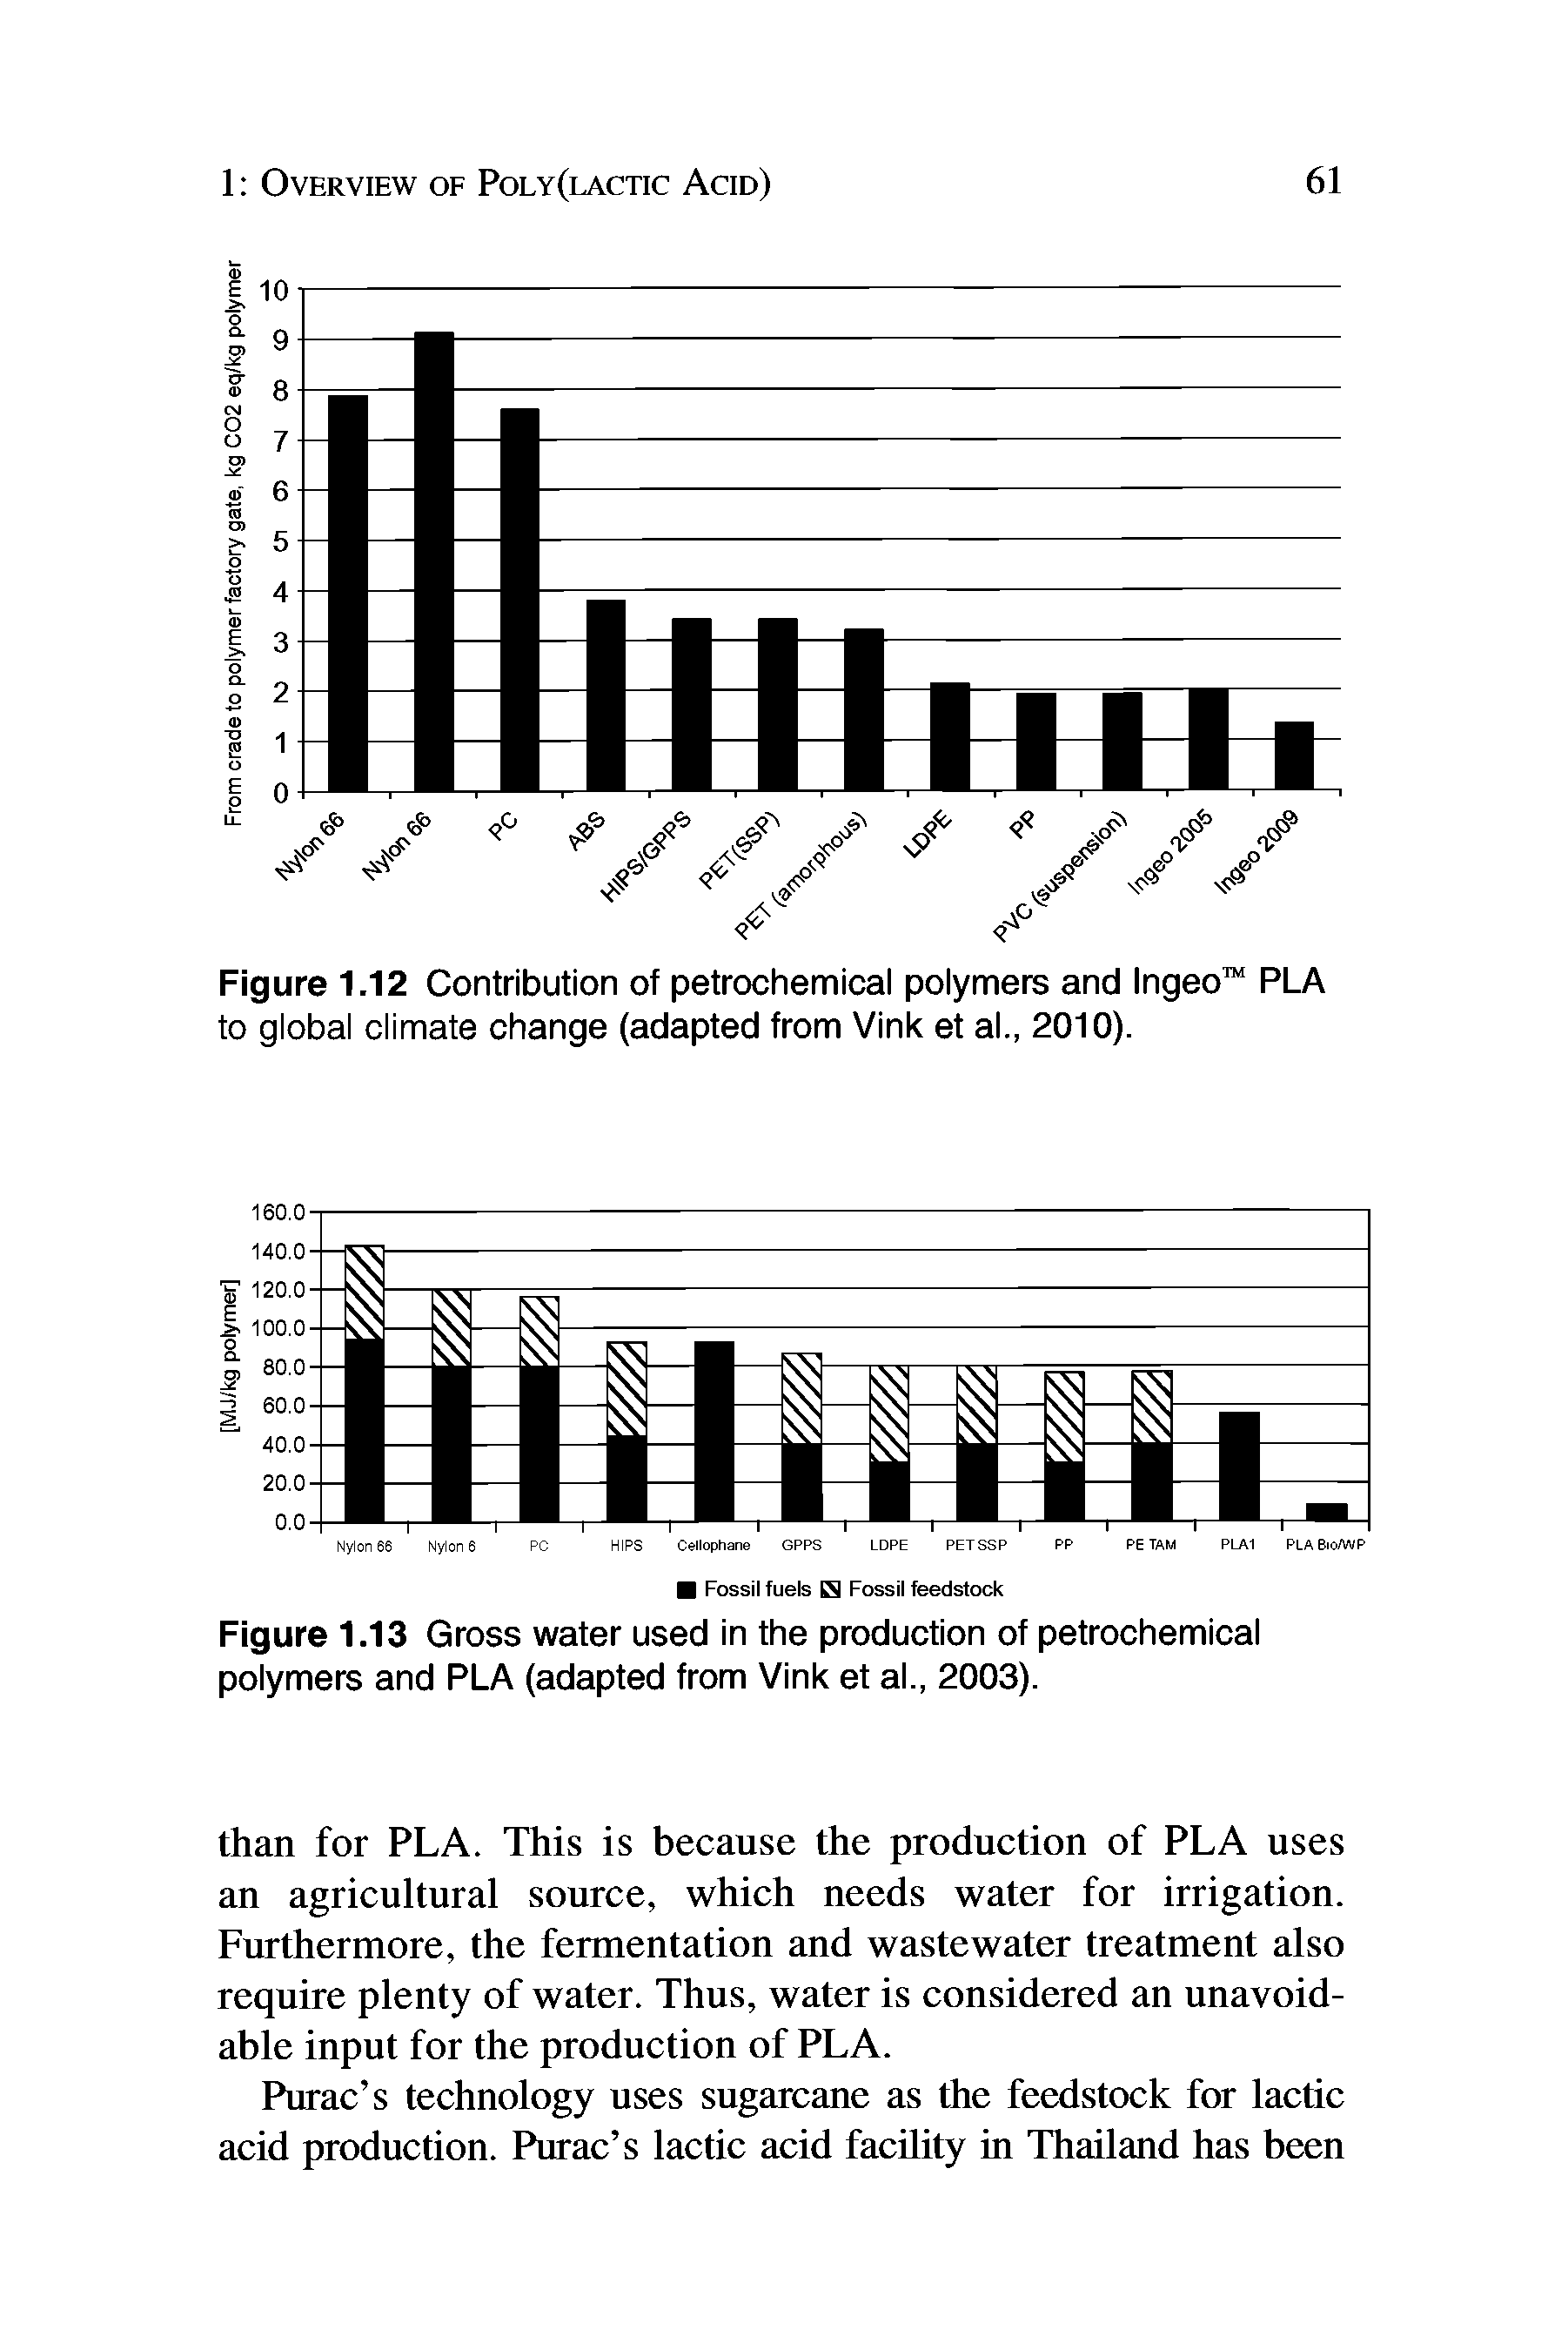 Figure 1.13 Gross water used in the production of petrochemical polymers and PLA (adapted from Vink et al., 2003).